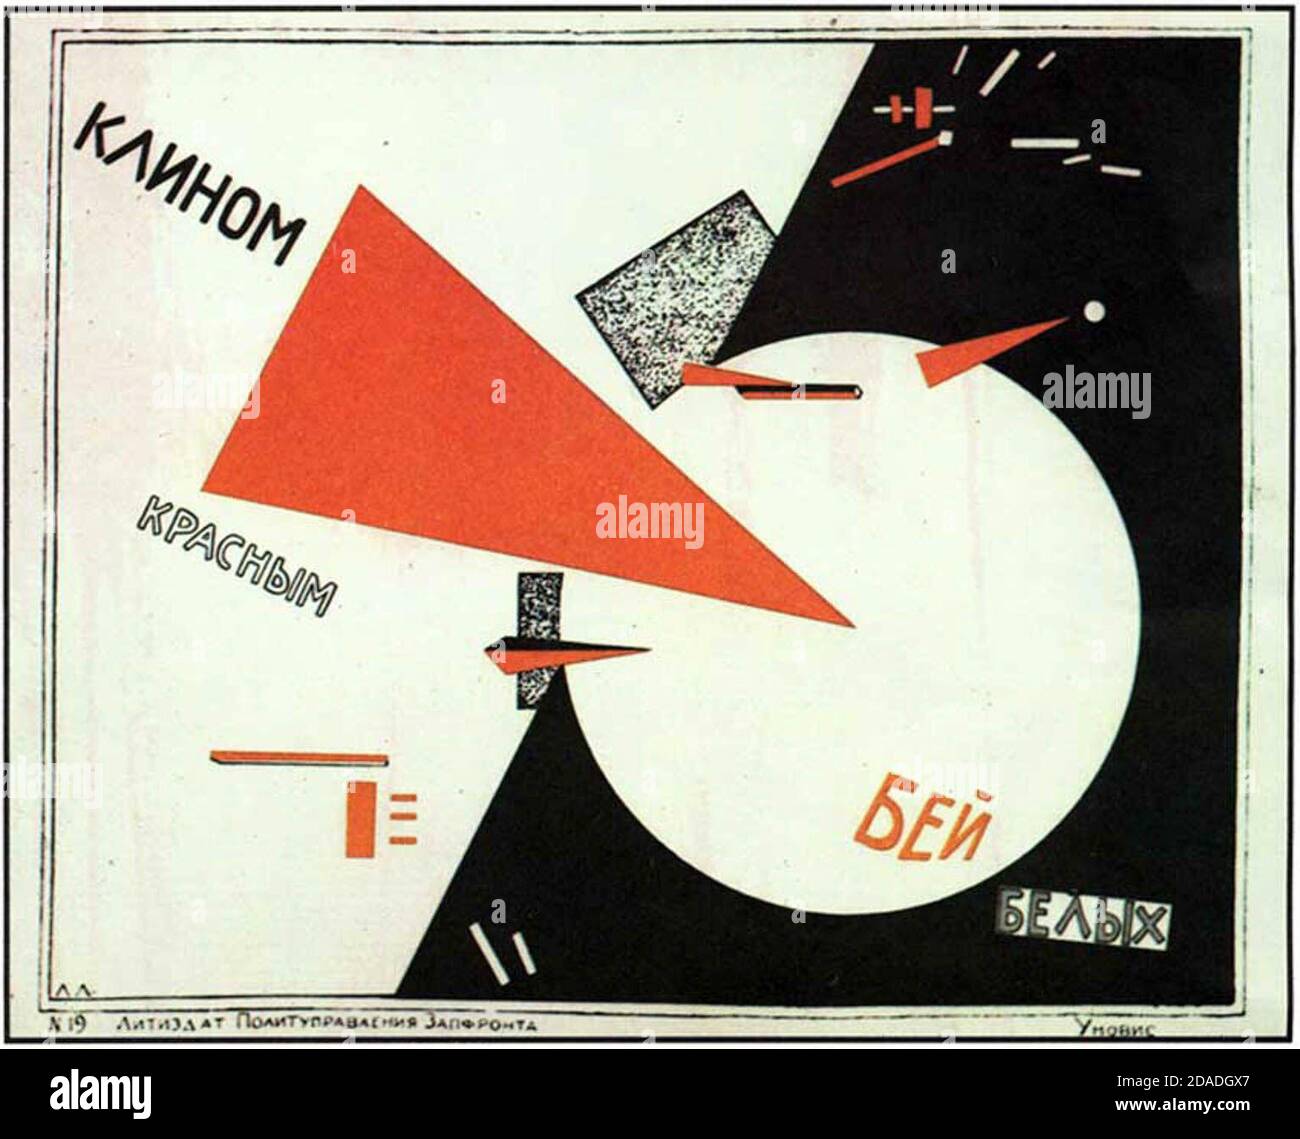 Beat the Whites with the Red Wedge, a famous pro-Bolshevik Constructivist propaganda poster by artist El Lissitsky uses abstract symbolism to depict the defeat of the Whites by the Red Army. Stock Photo